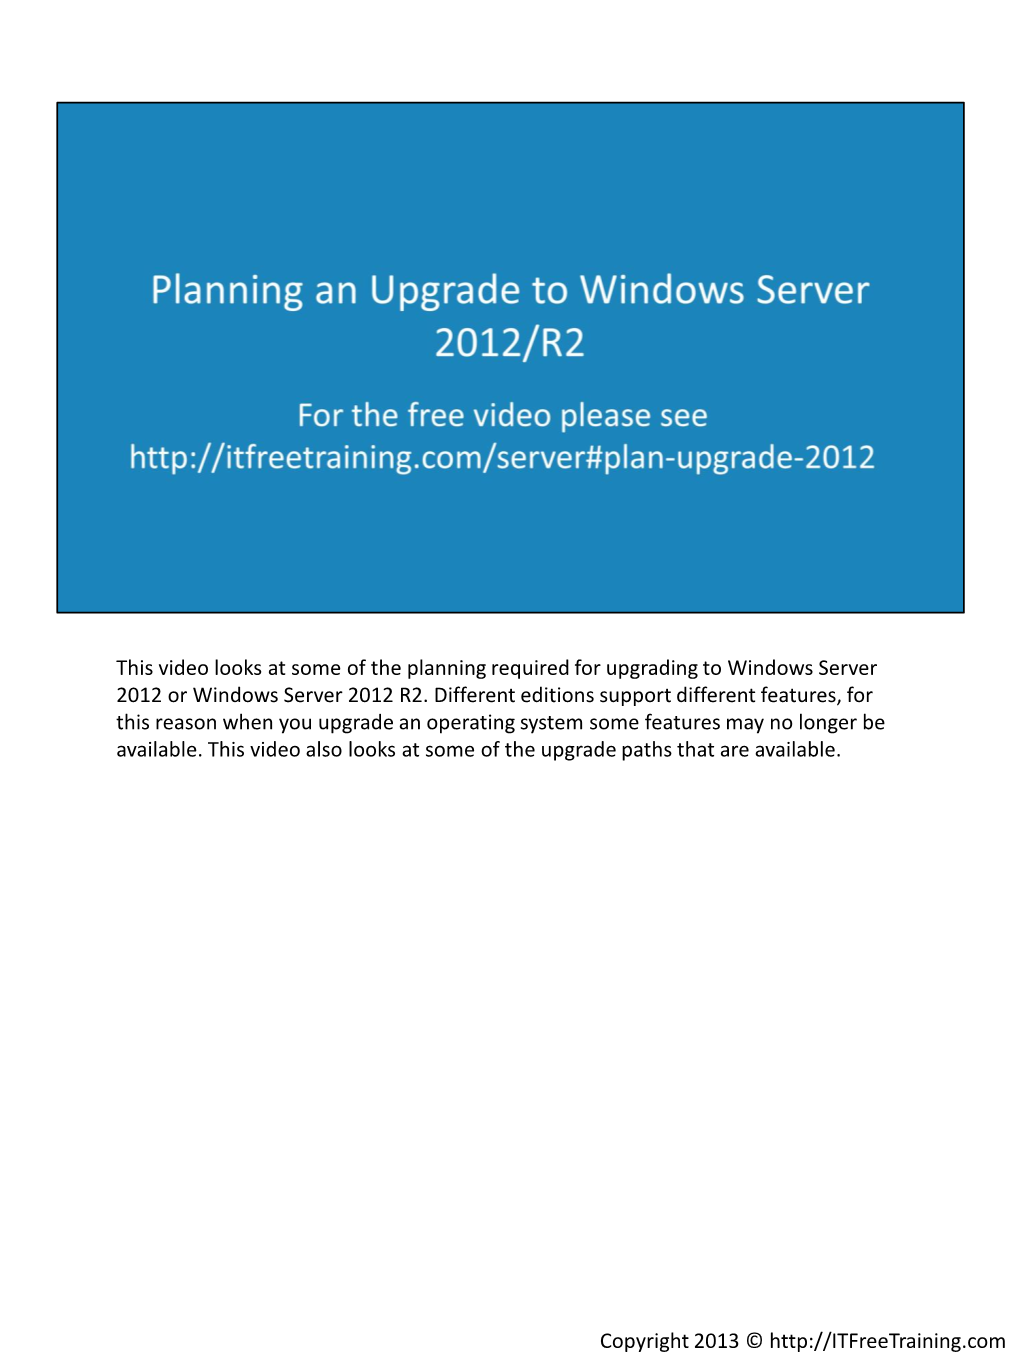 This Video Looks at Some of the Planning Required for Upgrading to Windows Server 2012 Or Windows Server 2012 R2